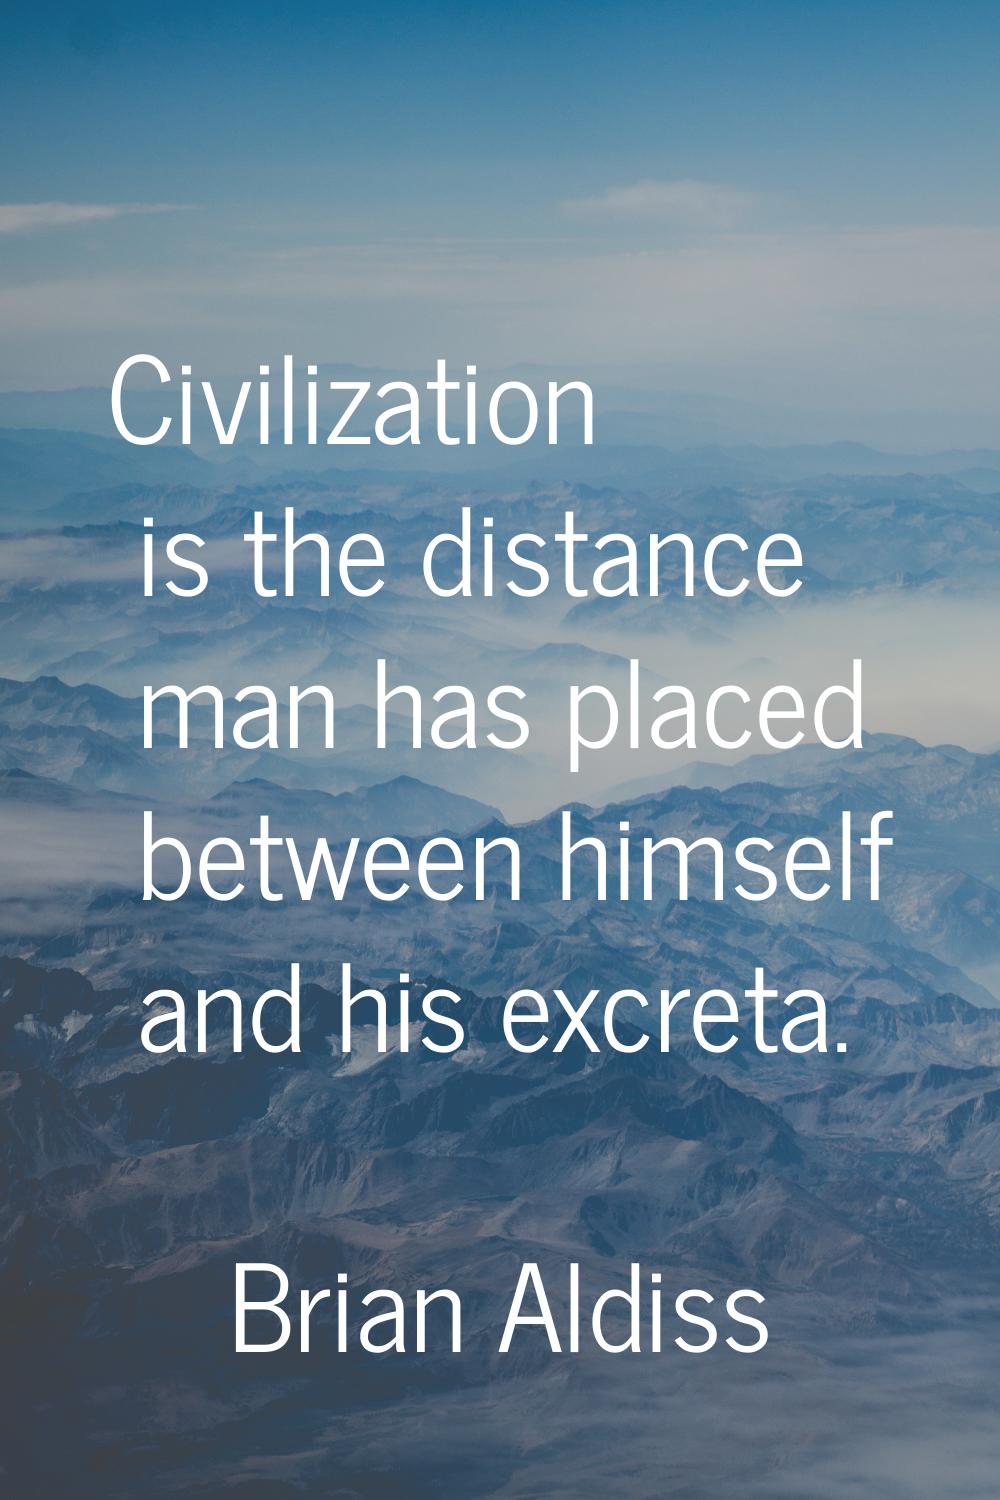 Civilization is the distance man has placed between himself and his excreta.